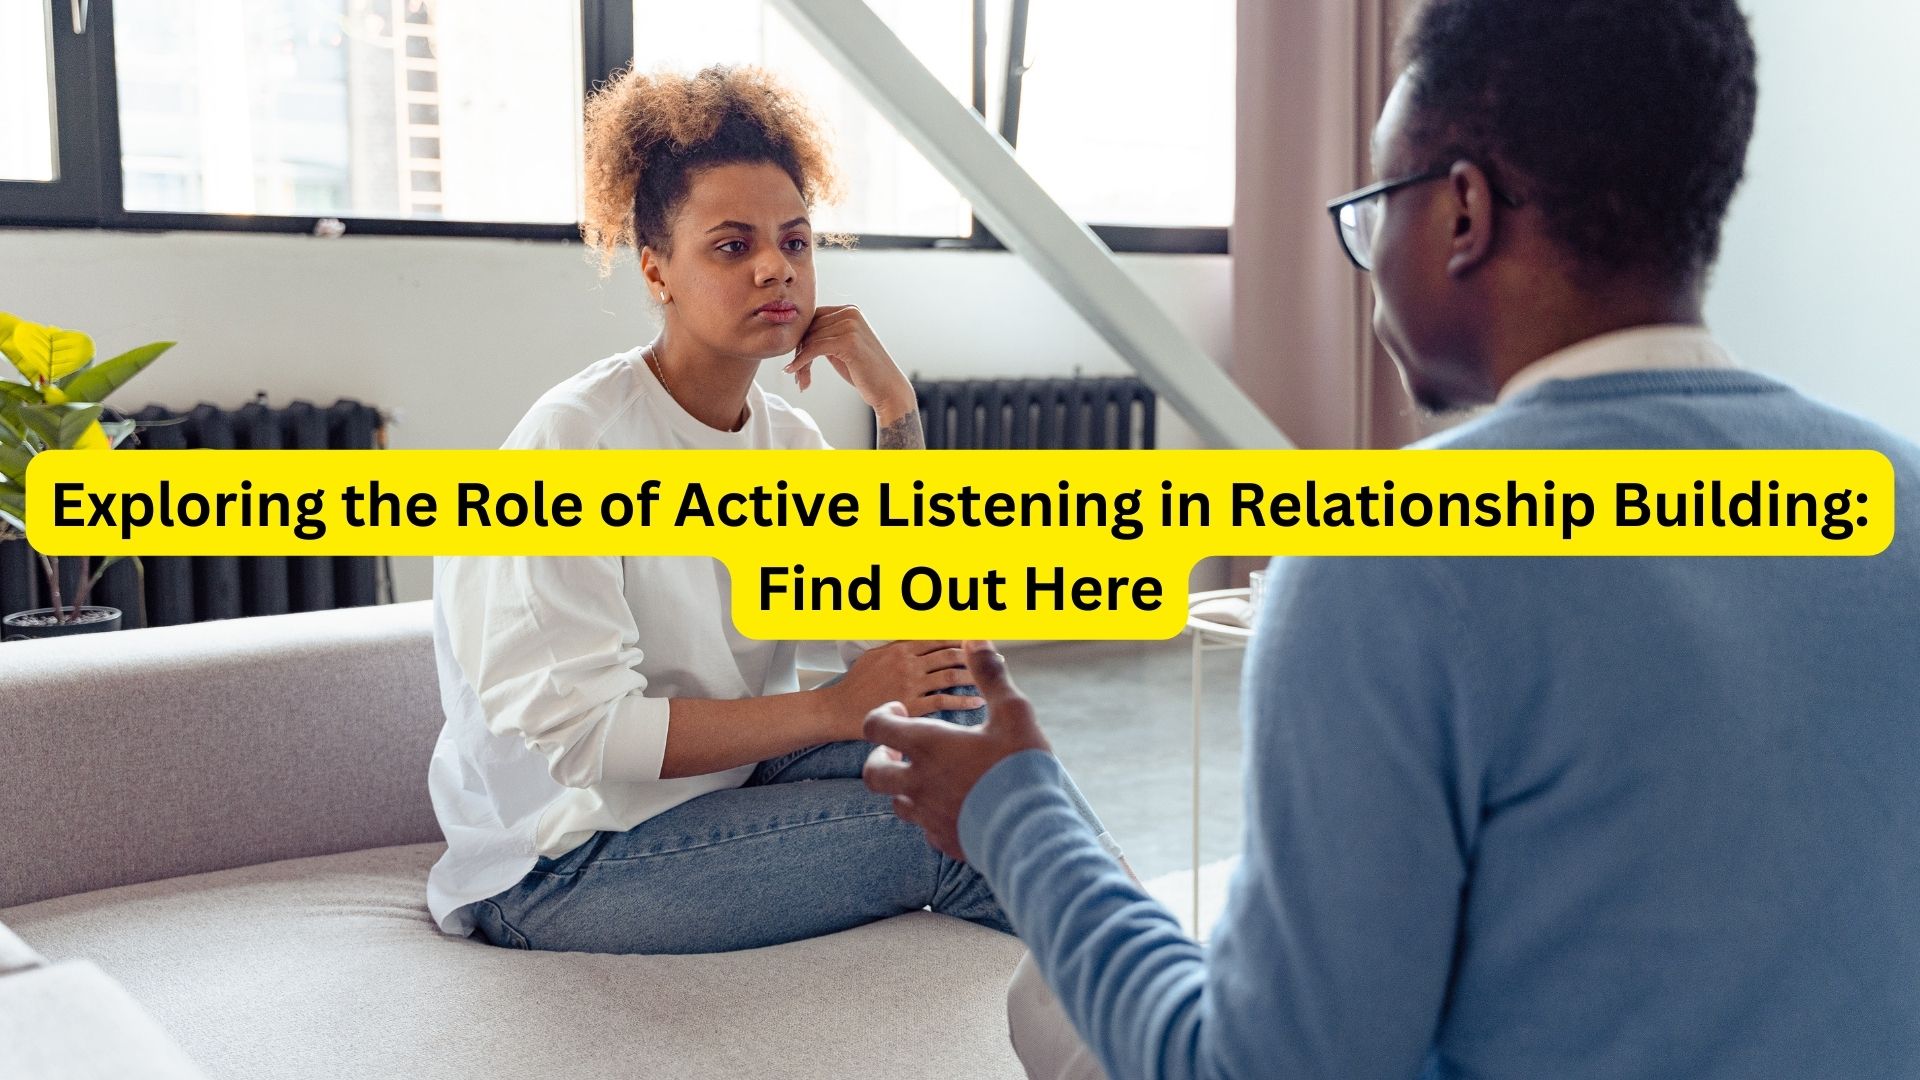 Exploring the Role of Active Listening in Relationship Building: Find Out Here